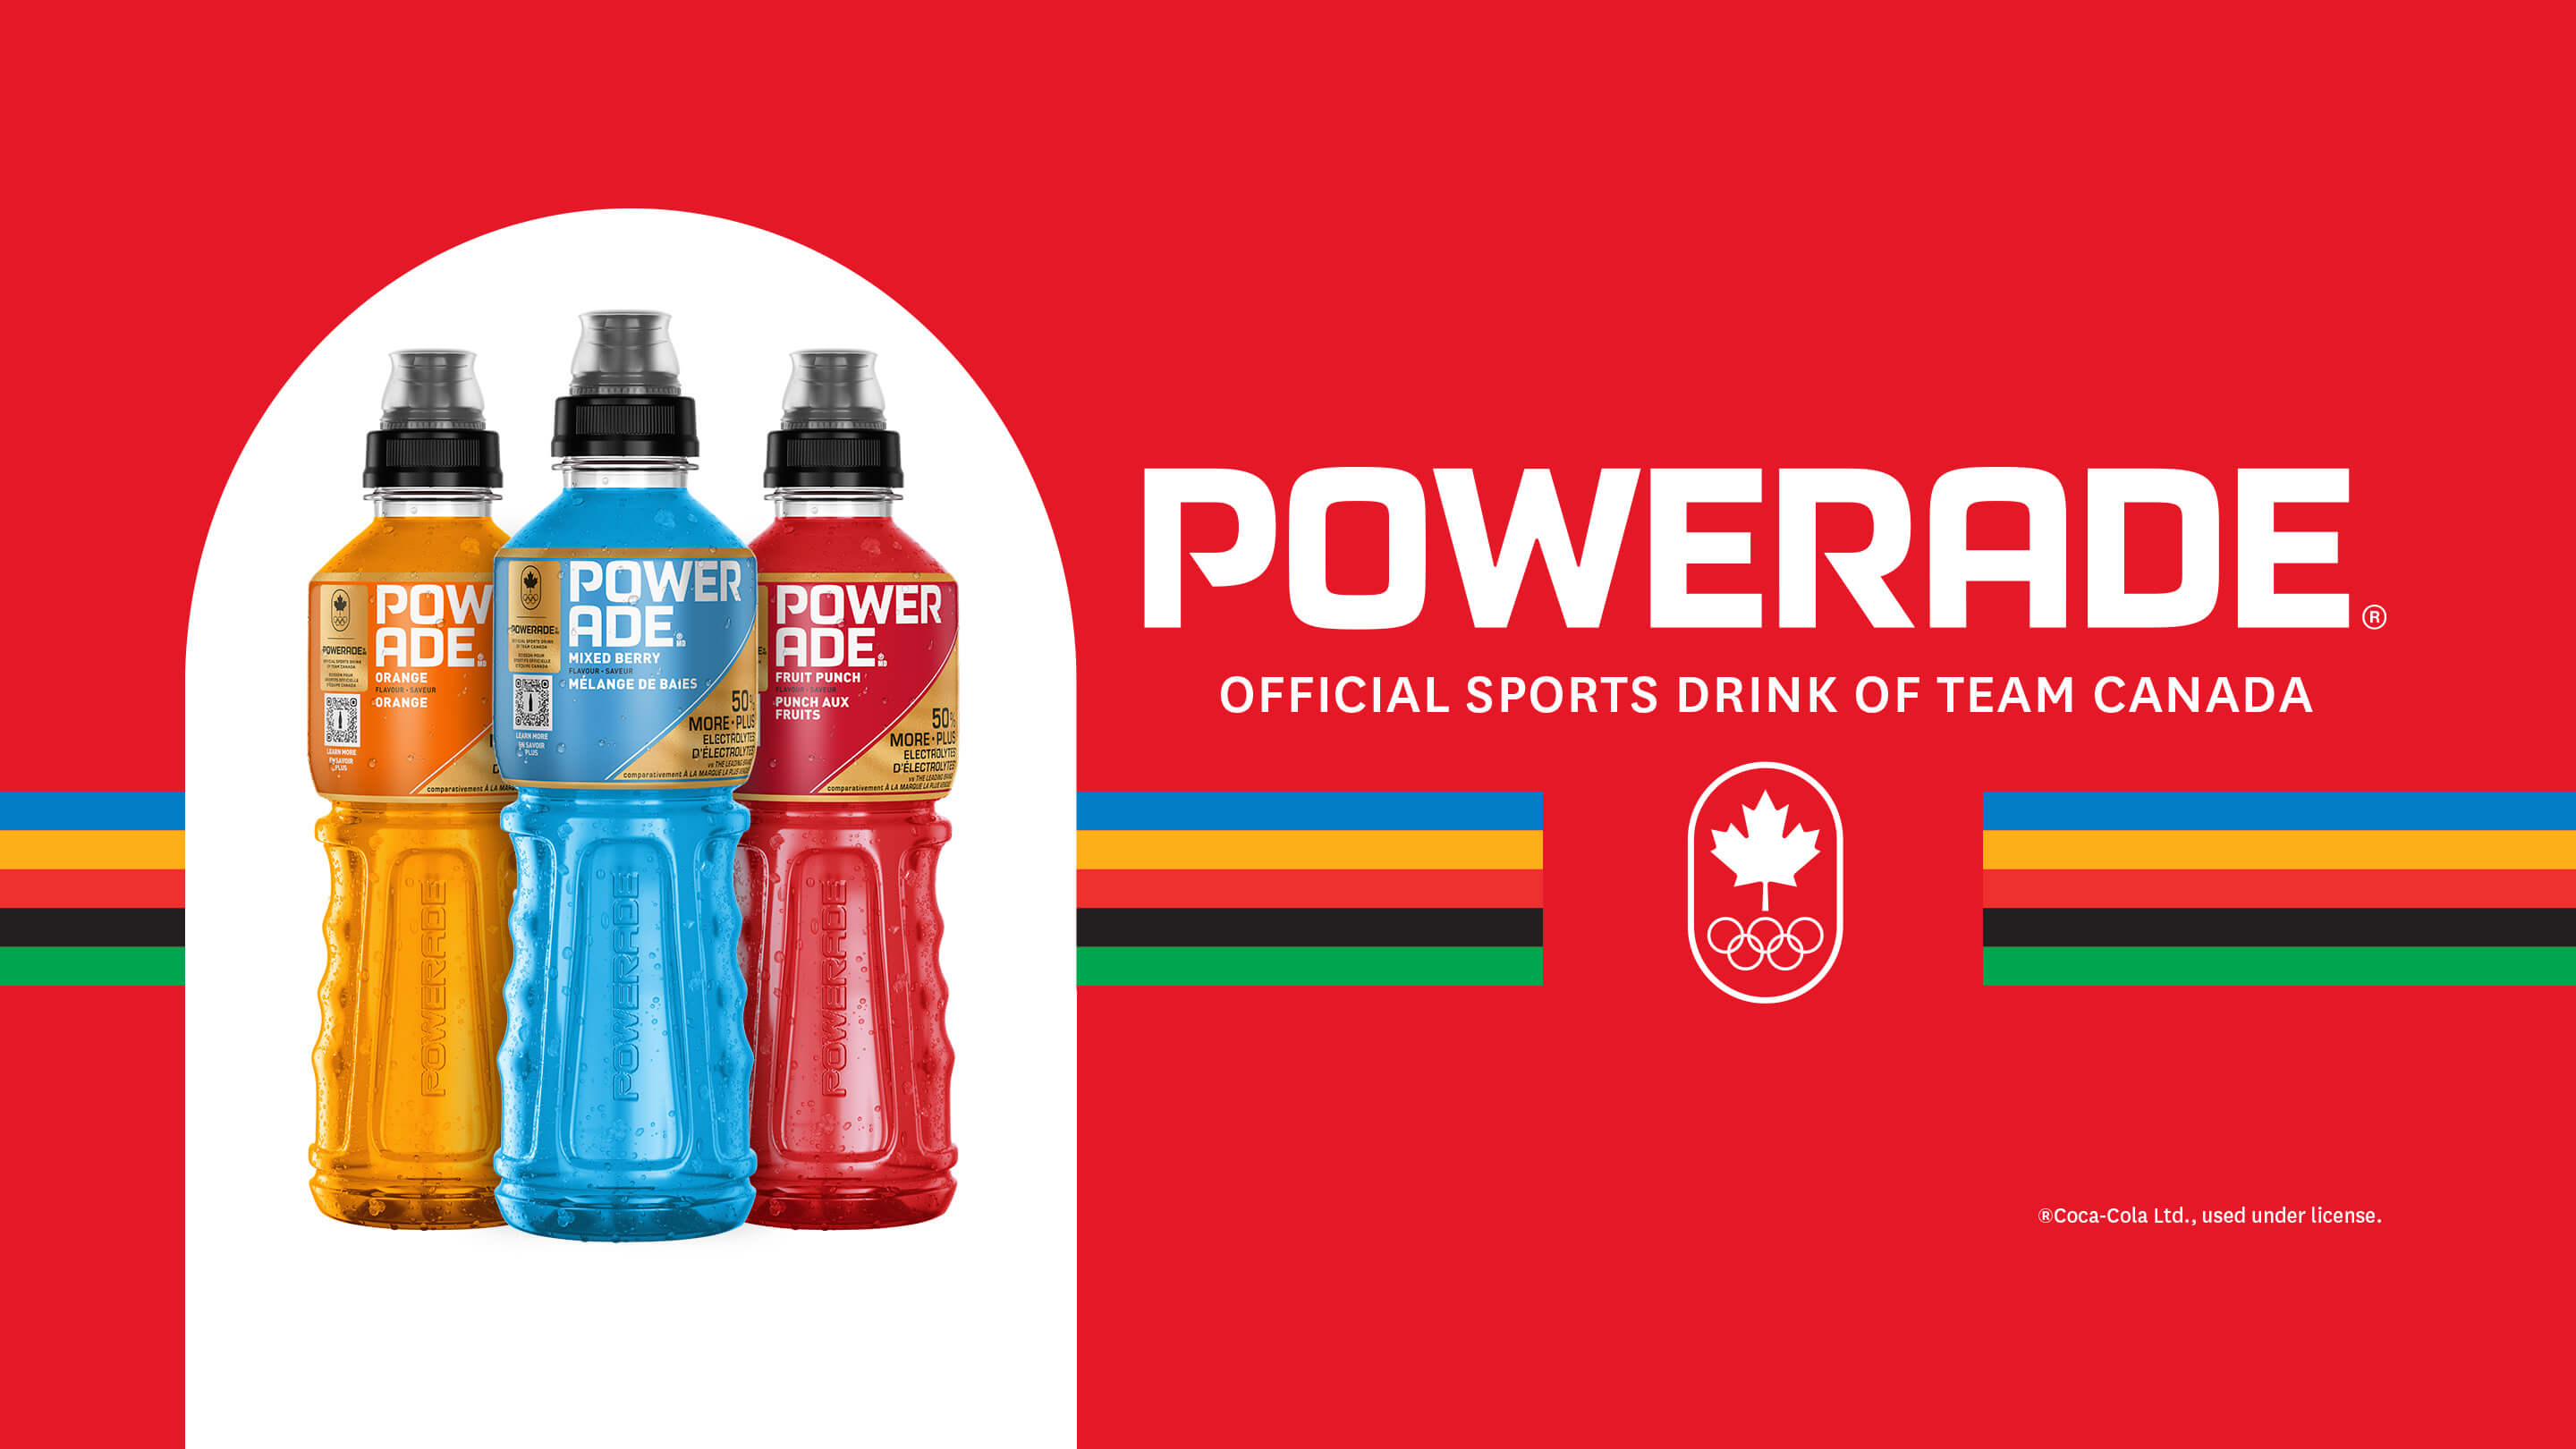 POWERADE. Official sports drink of Team Canada.